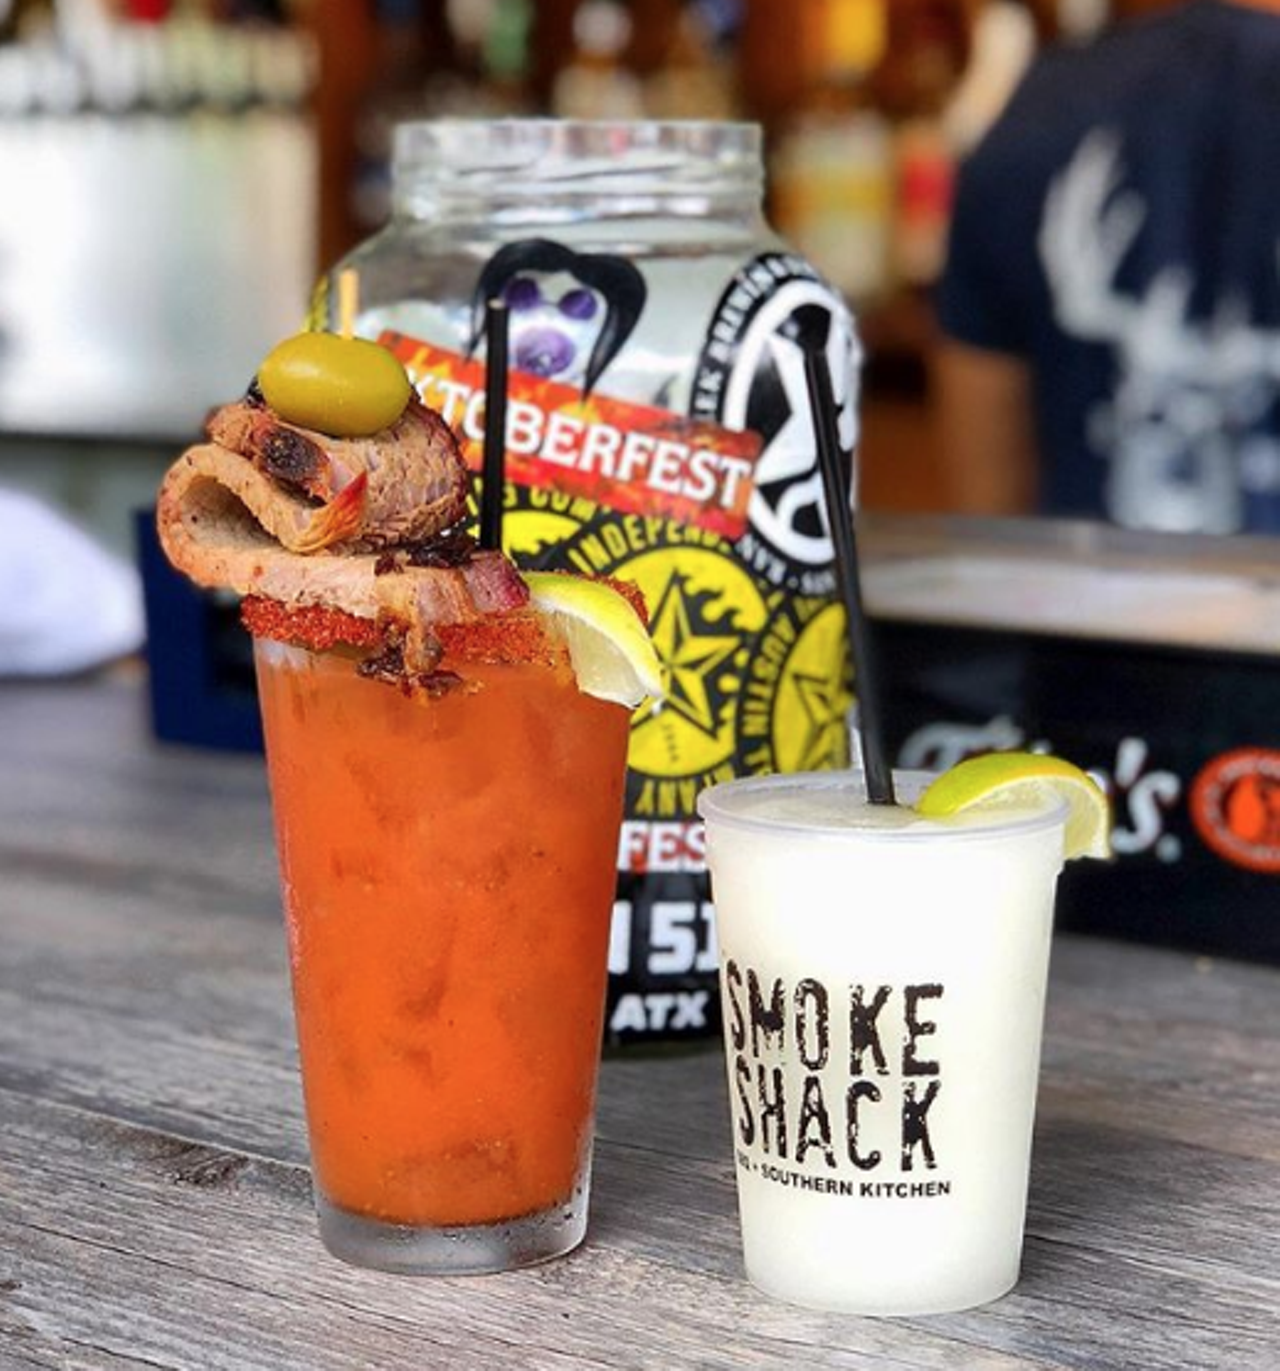 Bloody Marys
Most cities may have places that make Bloody Marys, but city makes the boozy drink all our own. Seriously, the more stuff you stuff into your Bloody Mary, the more puro it is.
Photo via Instagram / sip_sa